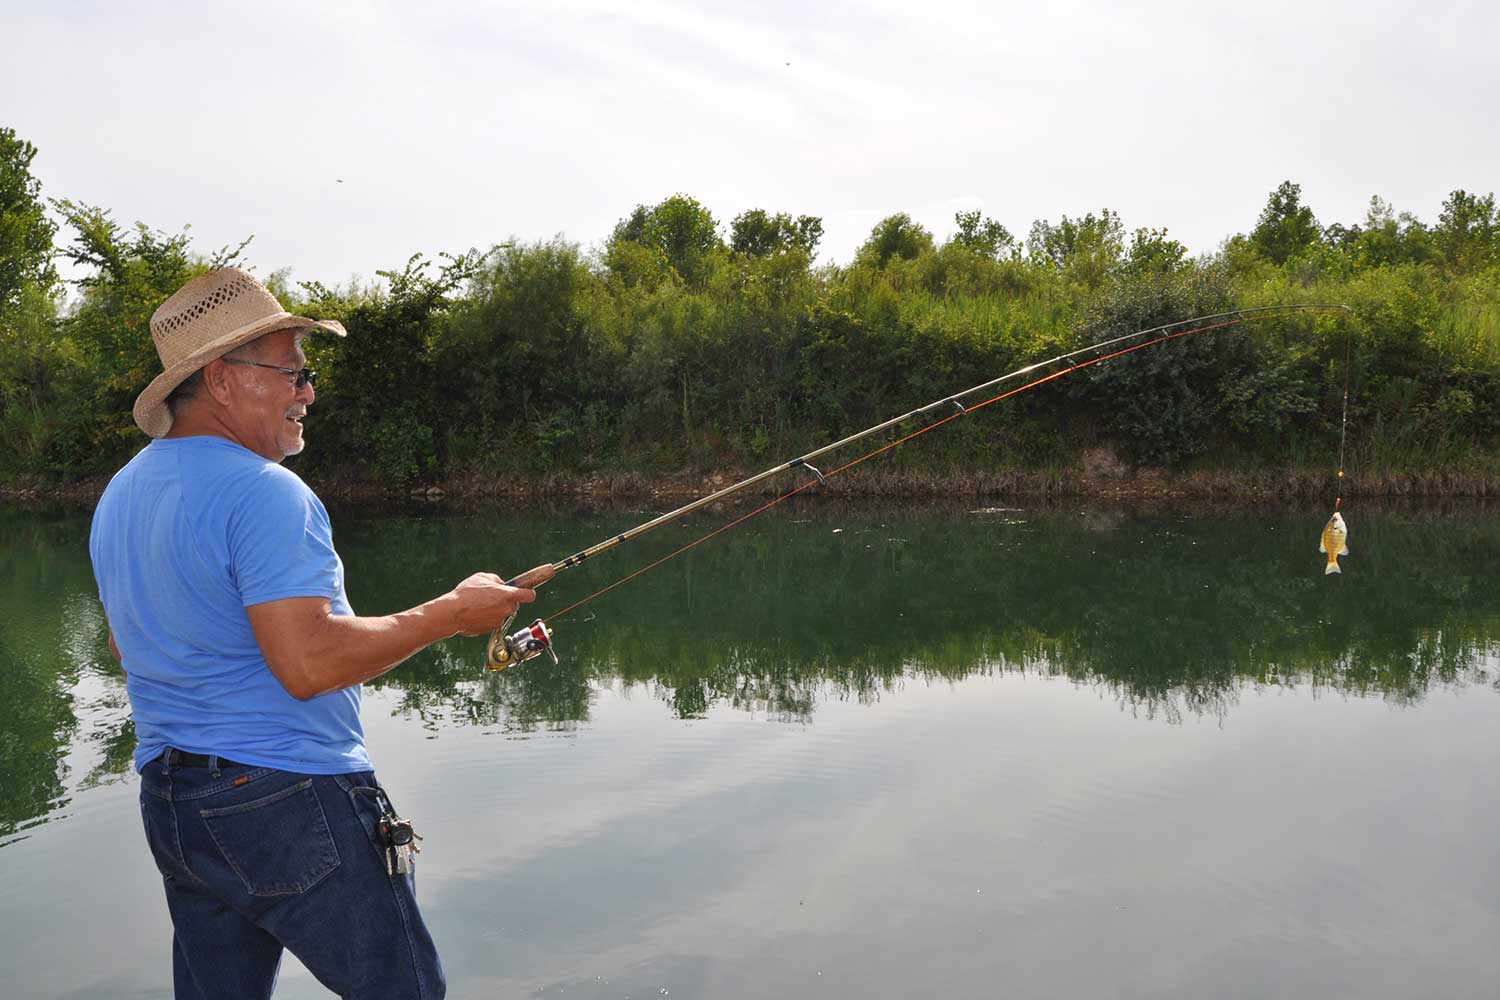 A person fishing along the shore with a small fish at the end of the pole.